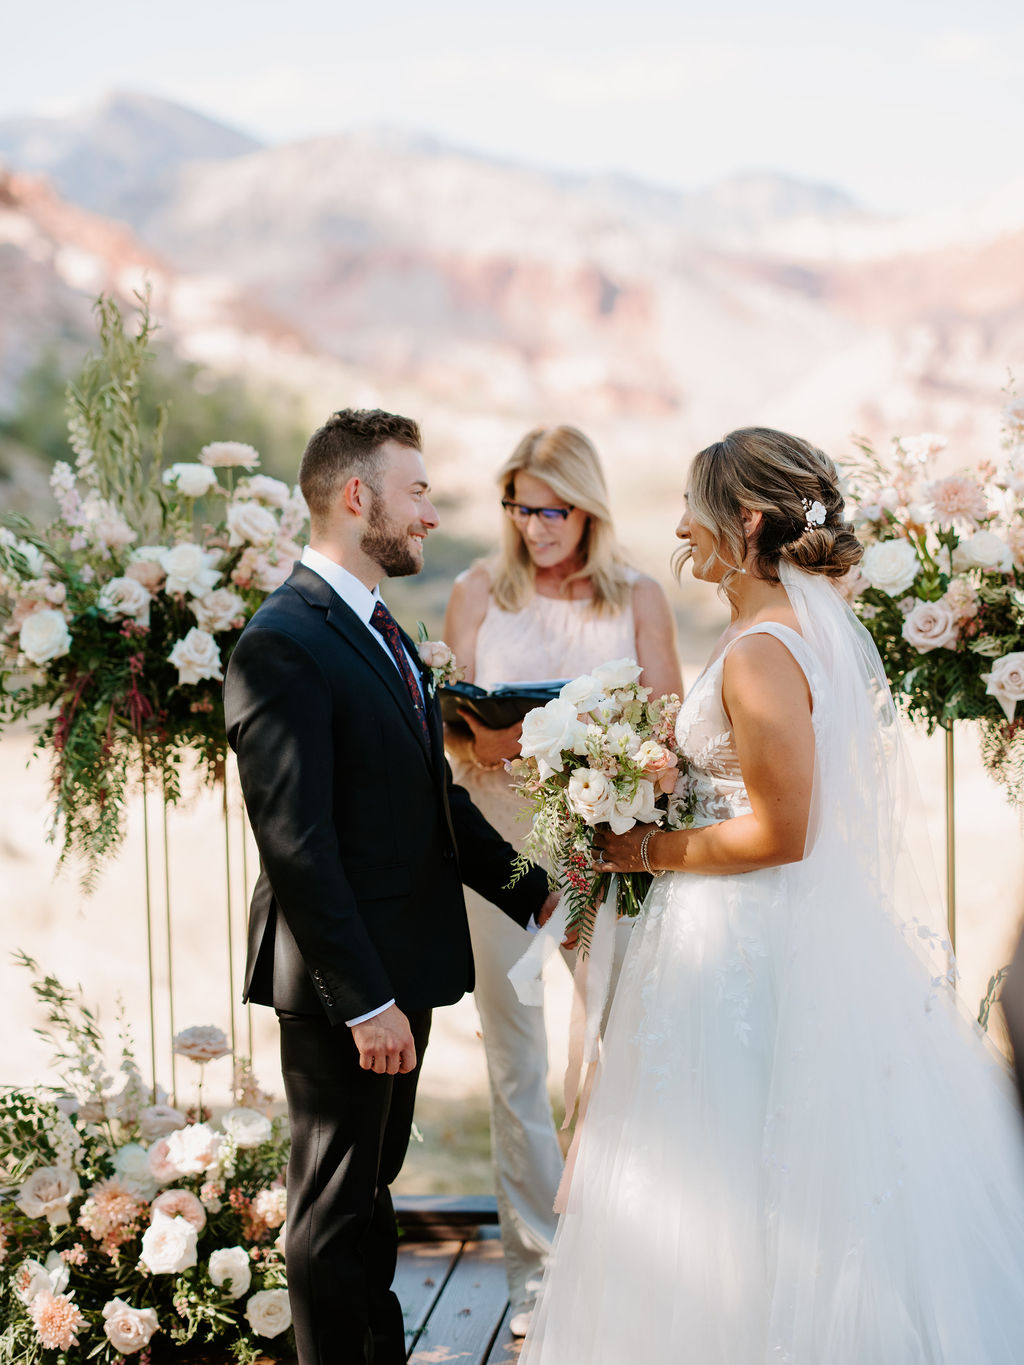 Ceremony Decor with Harlow Stands and Floral and Mountains in the back for Romantic Desert & Backyard Micro-Wedding 